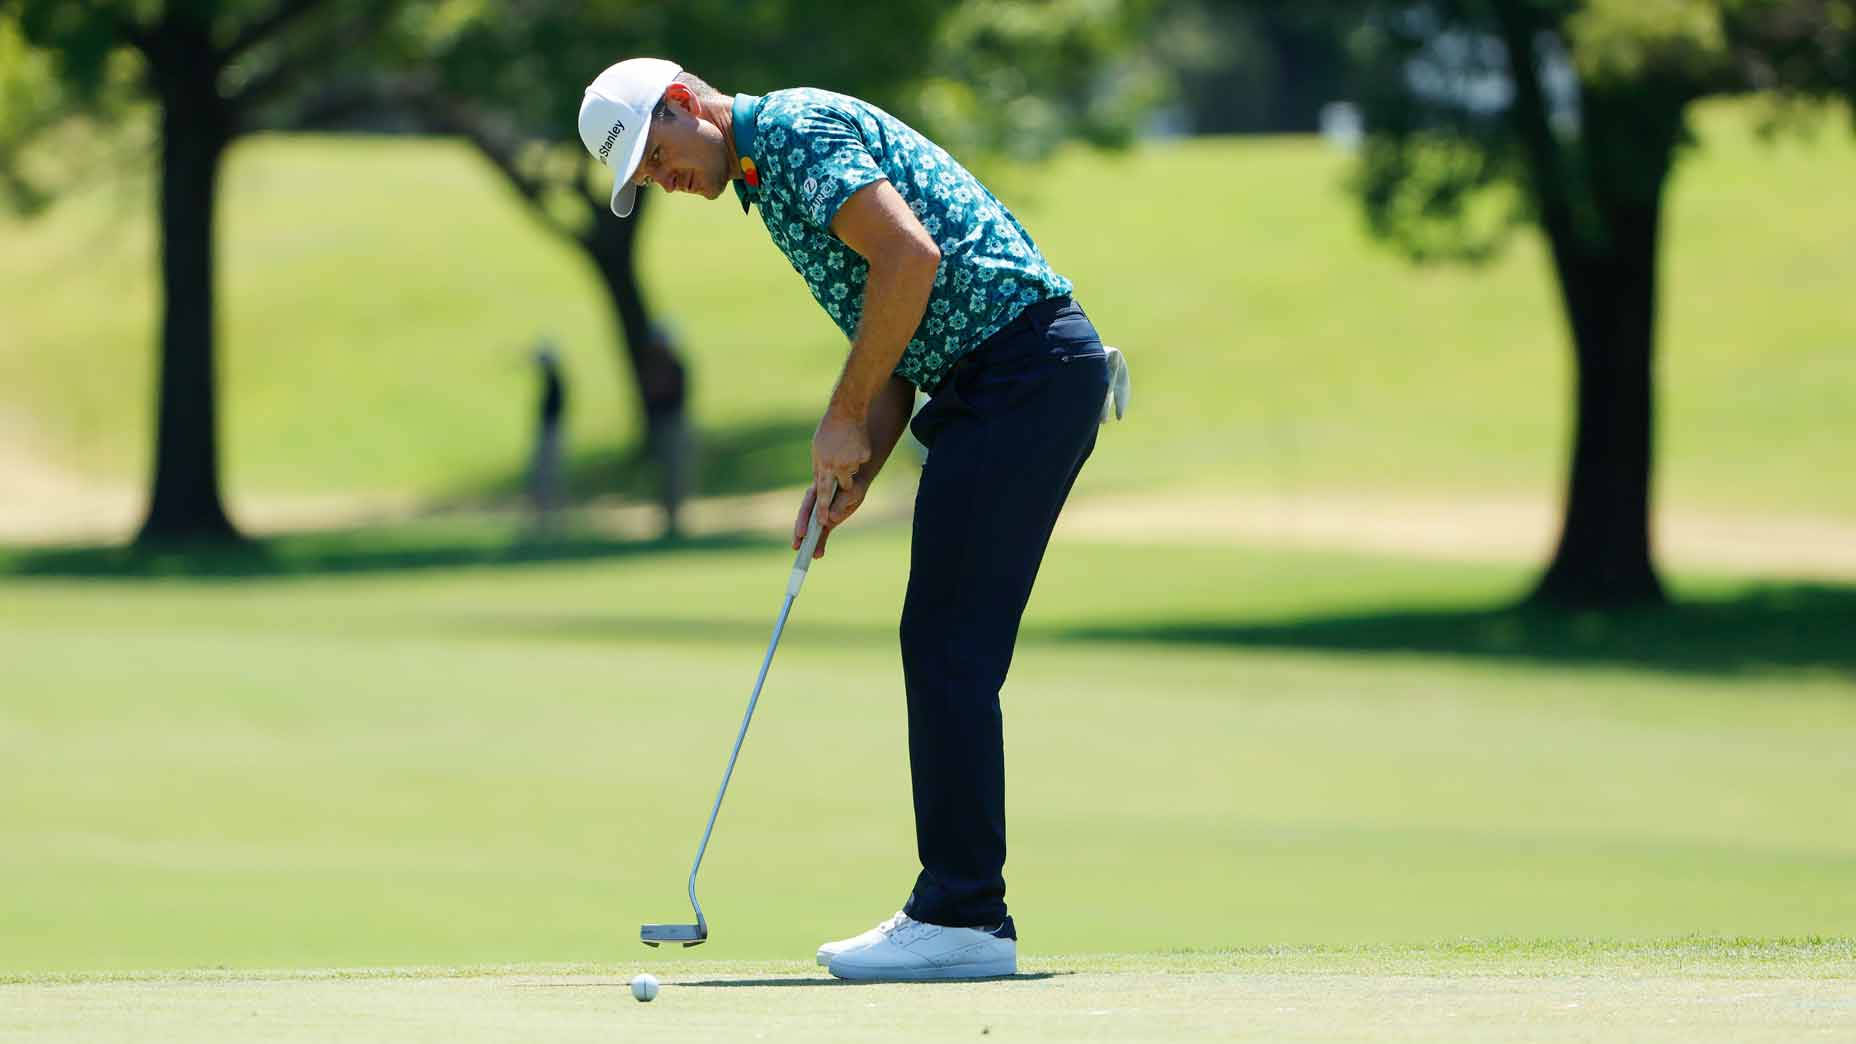 Justin Rose Attempting To Hit A Putt Wallpaper